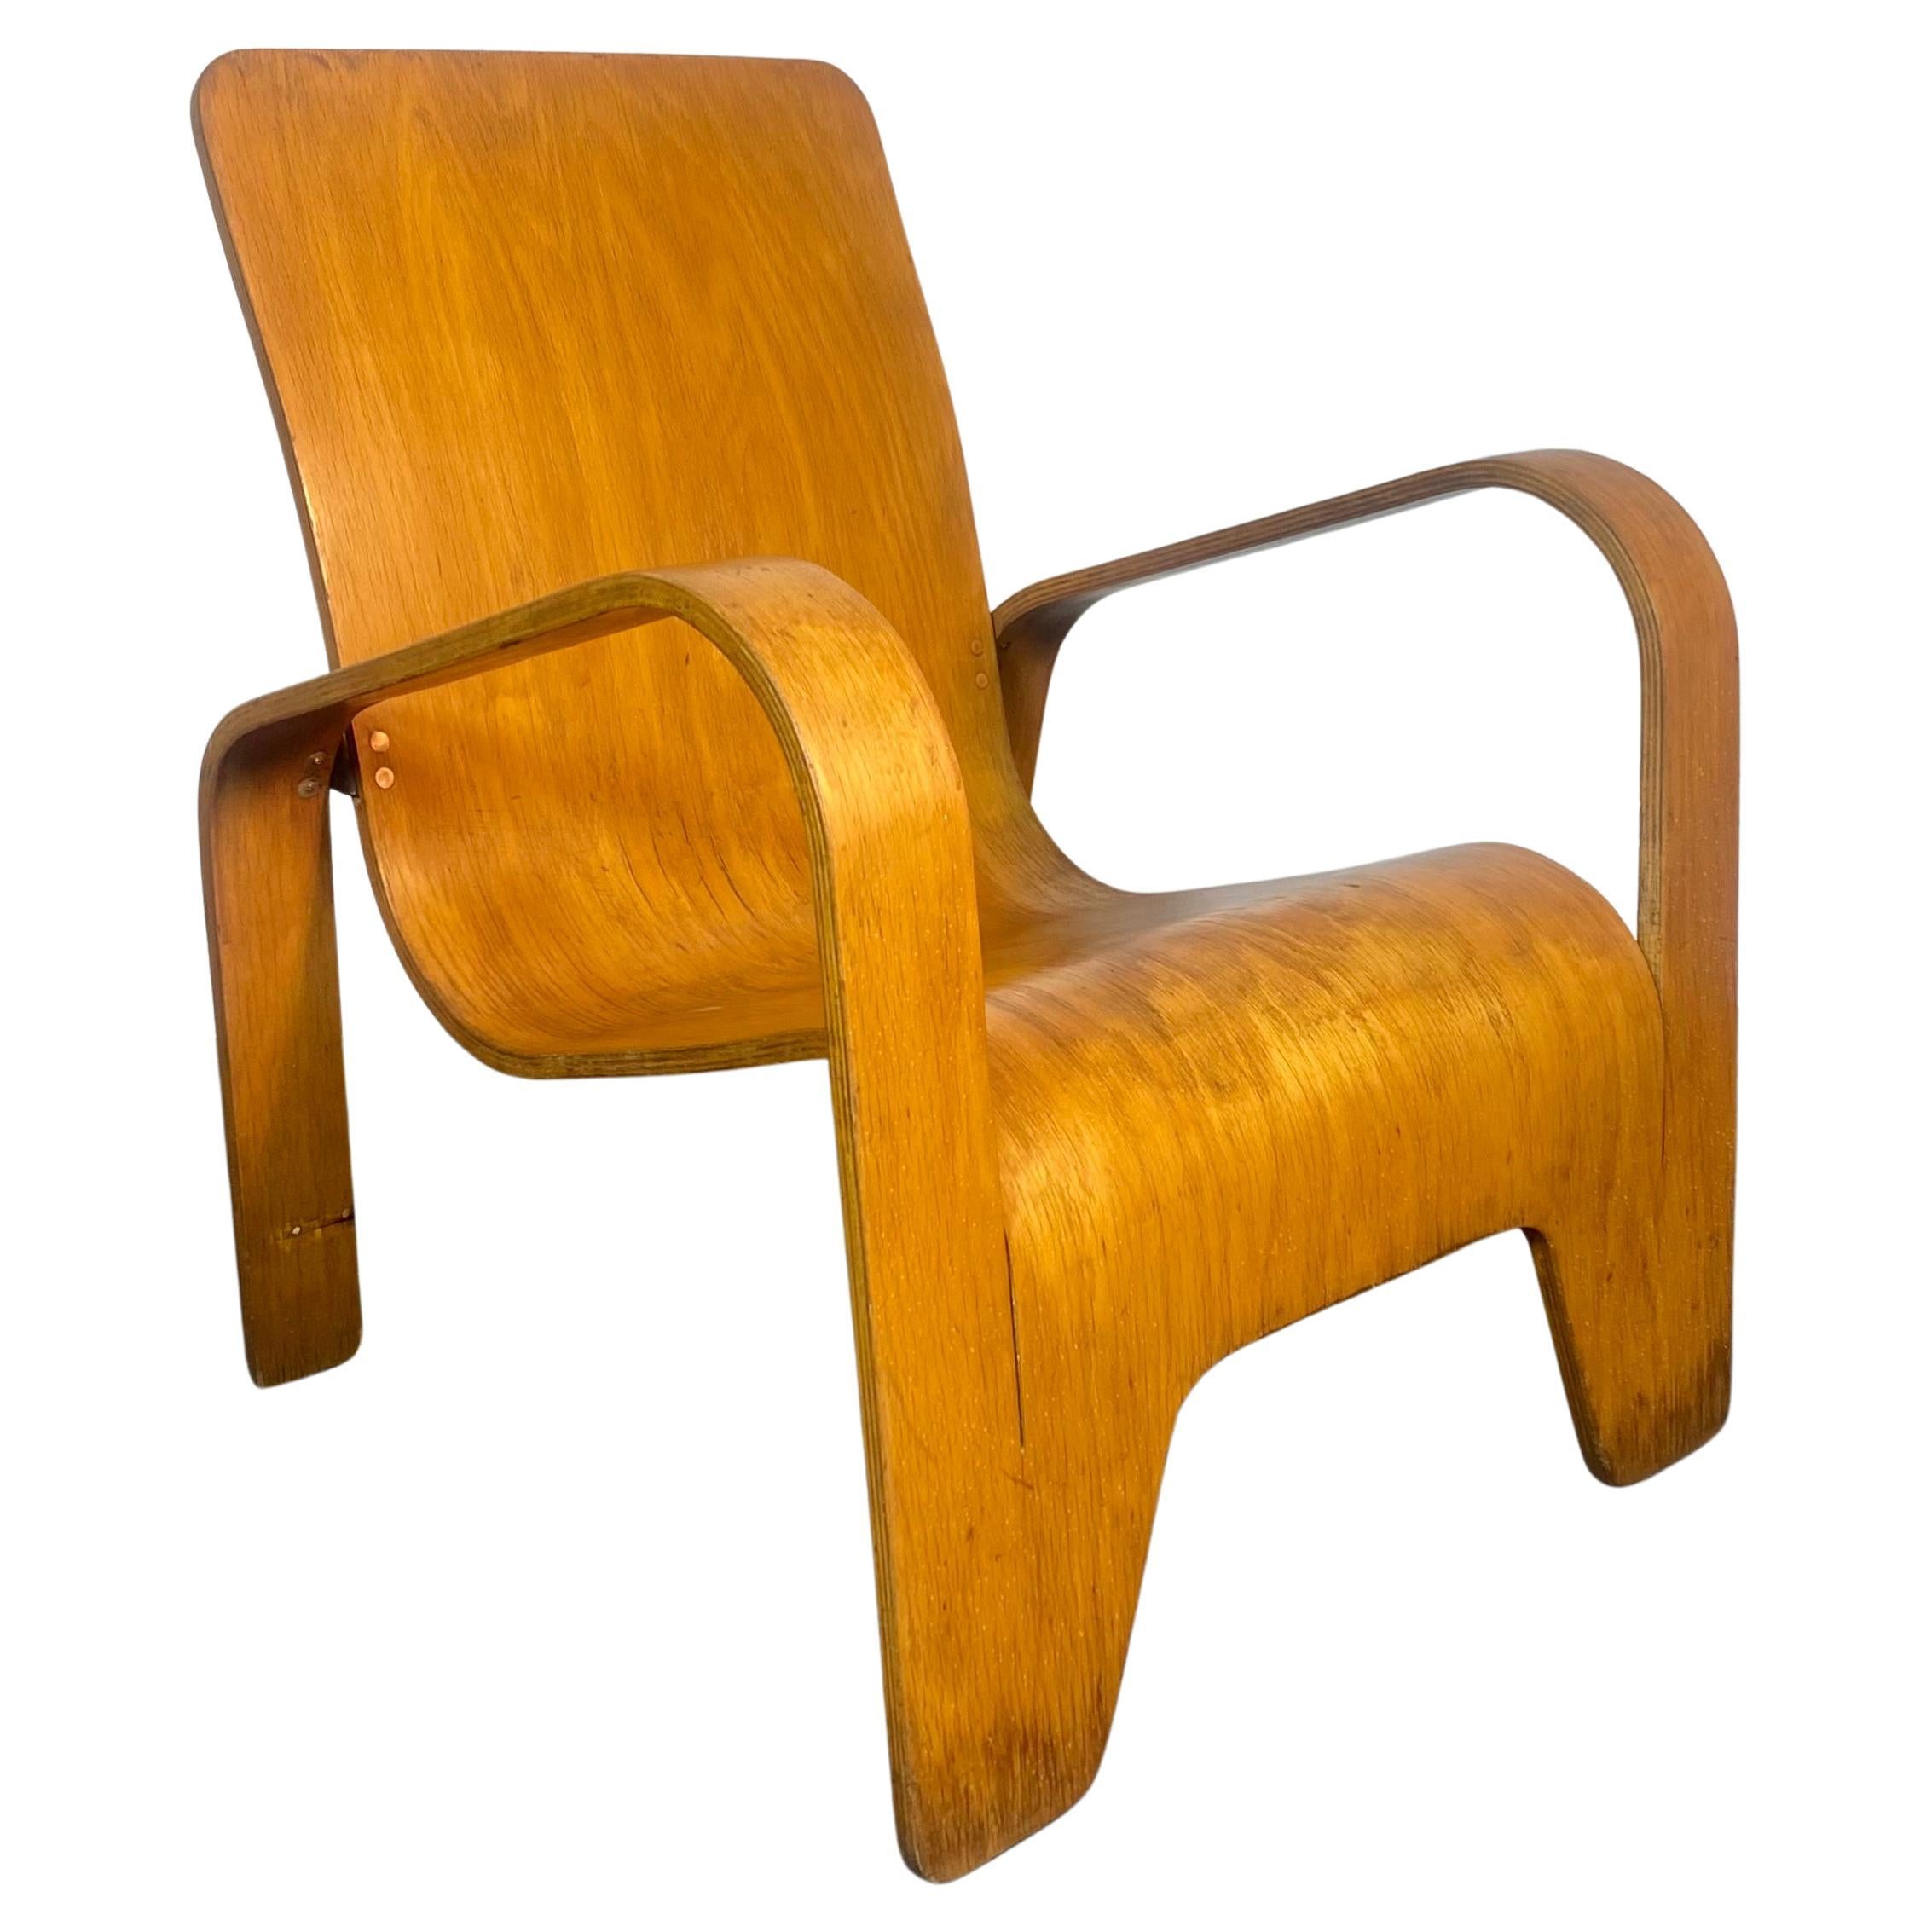 LaWo1 Molded Plywood Lounge Chair by Han Pieck for Lawo Ommen/ Netherlands 1945 For Sale